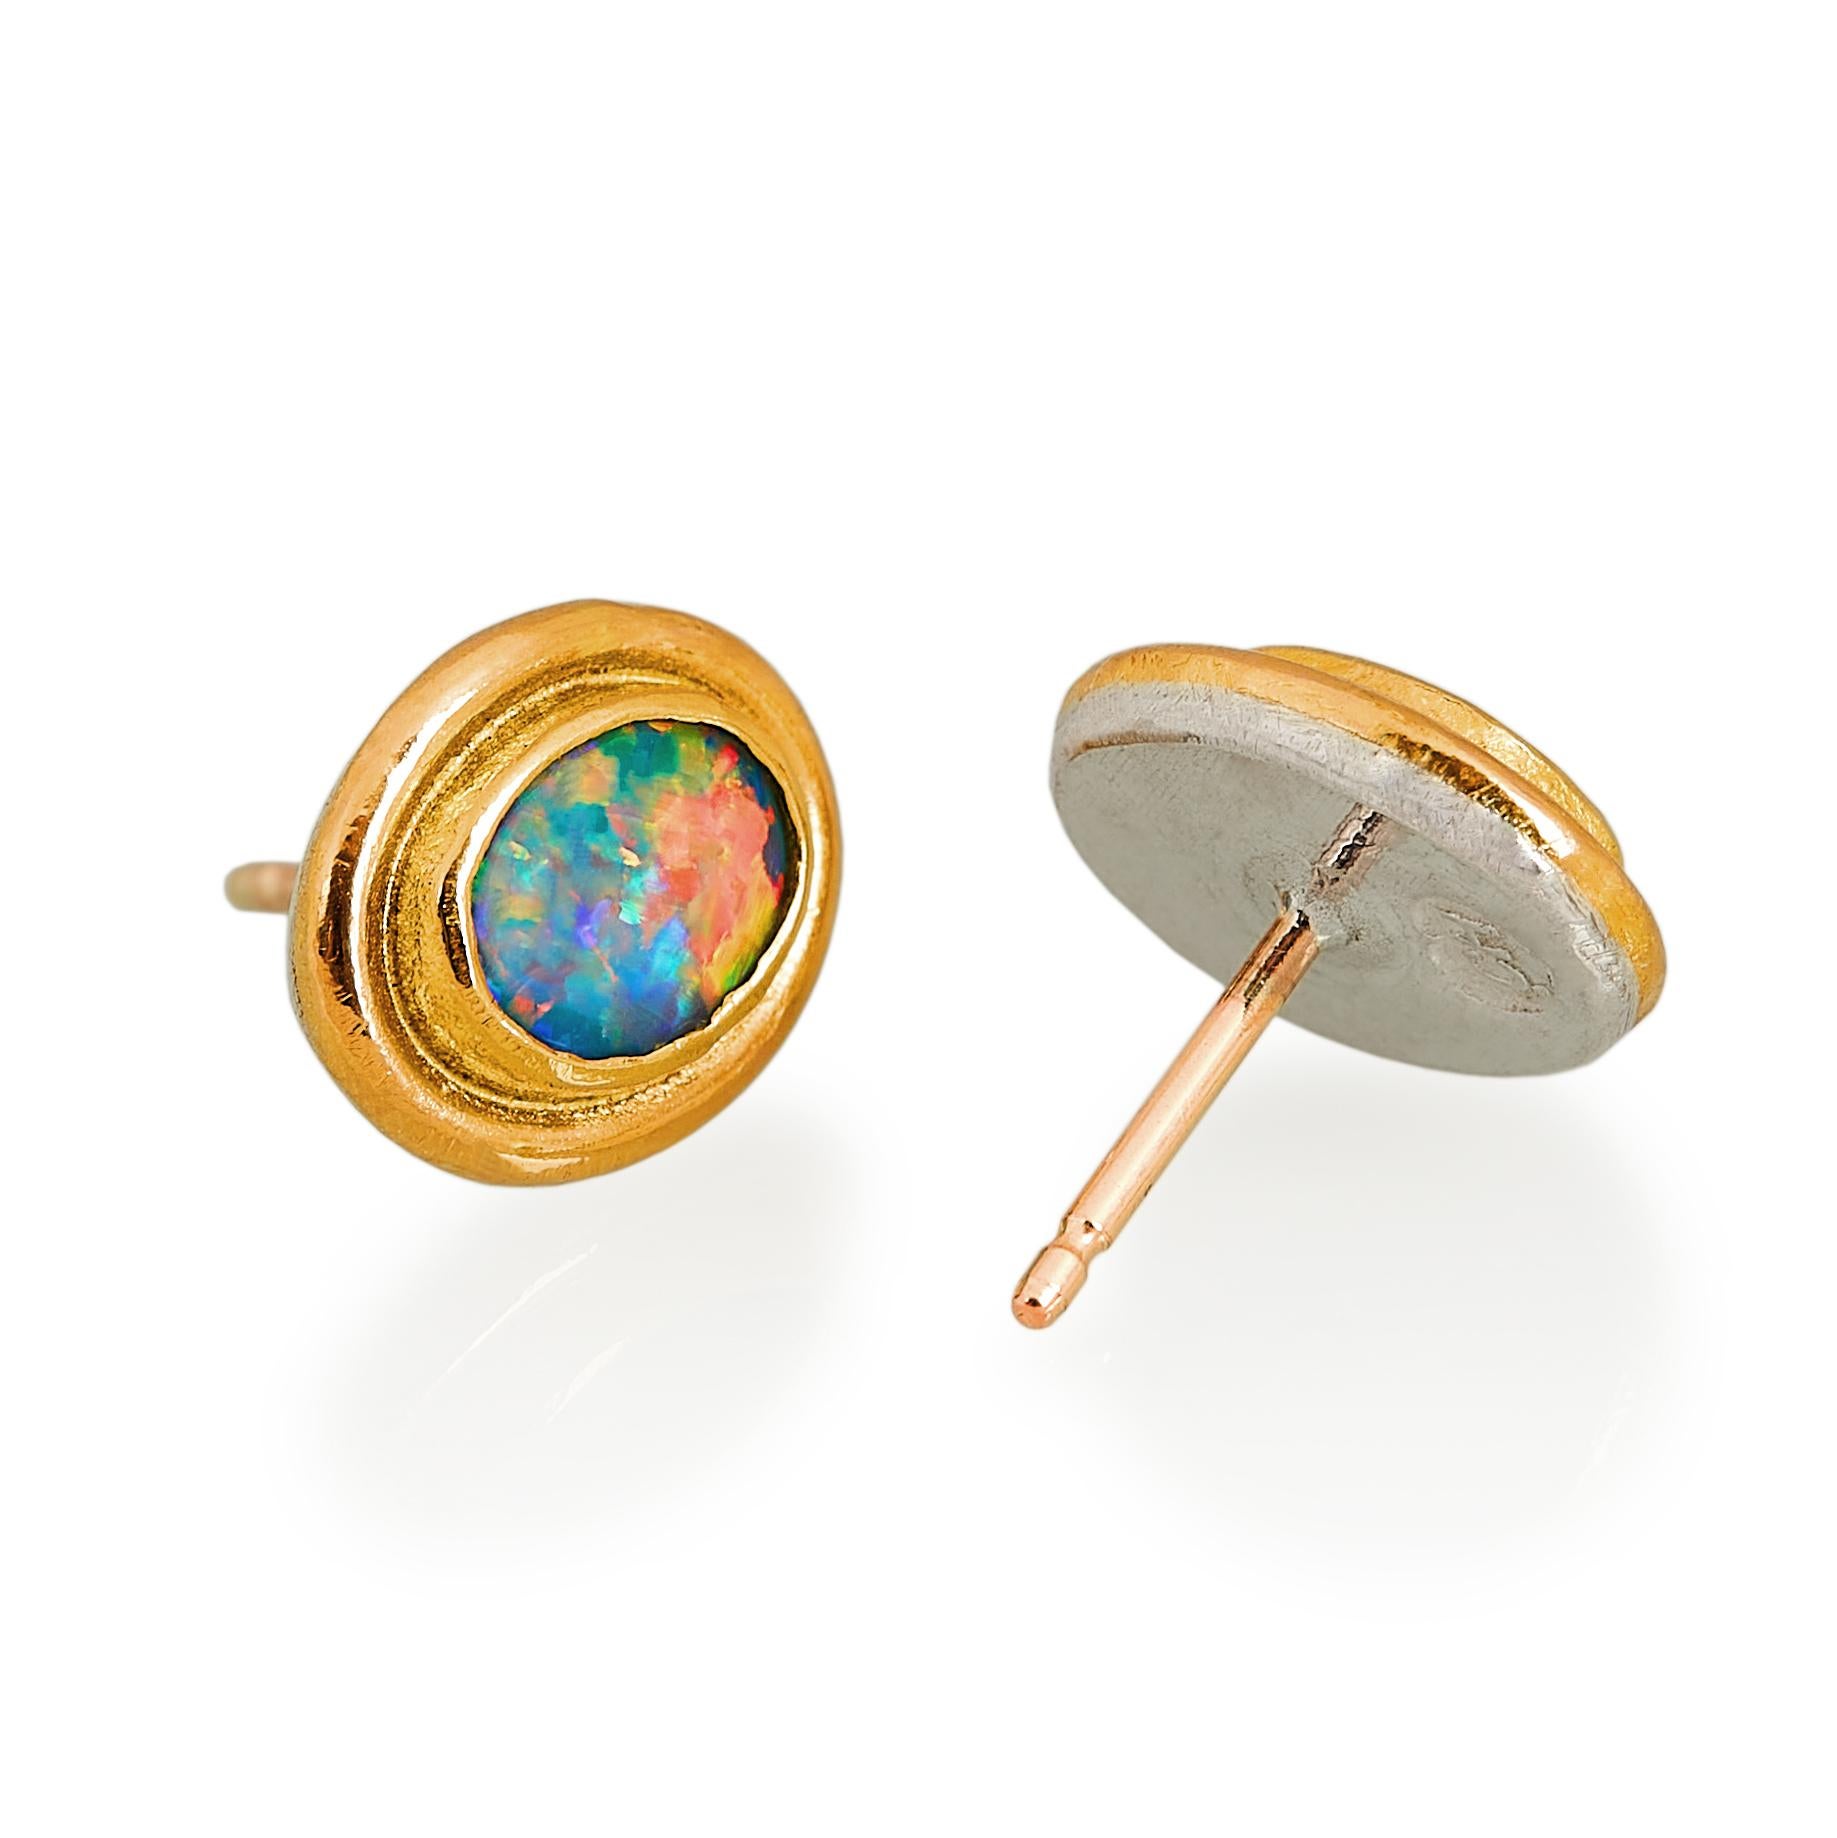 Handmade Charmian Harris stud earrings that can easily worn on any occasion. They are made with bright doublet opals that refract almost all the colours of the rainbow. The opals are set in ample 22 karat gold which is backed on silver and they have